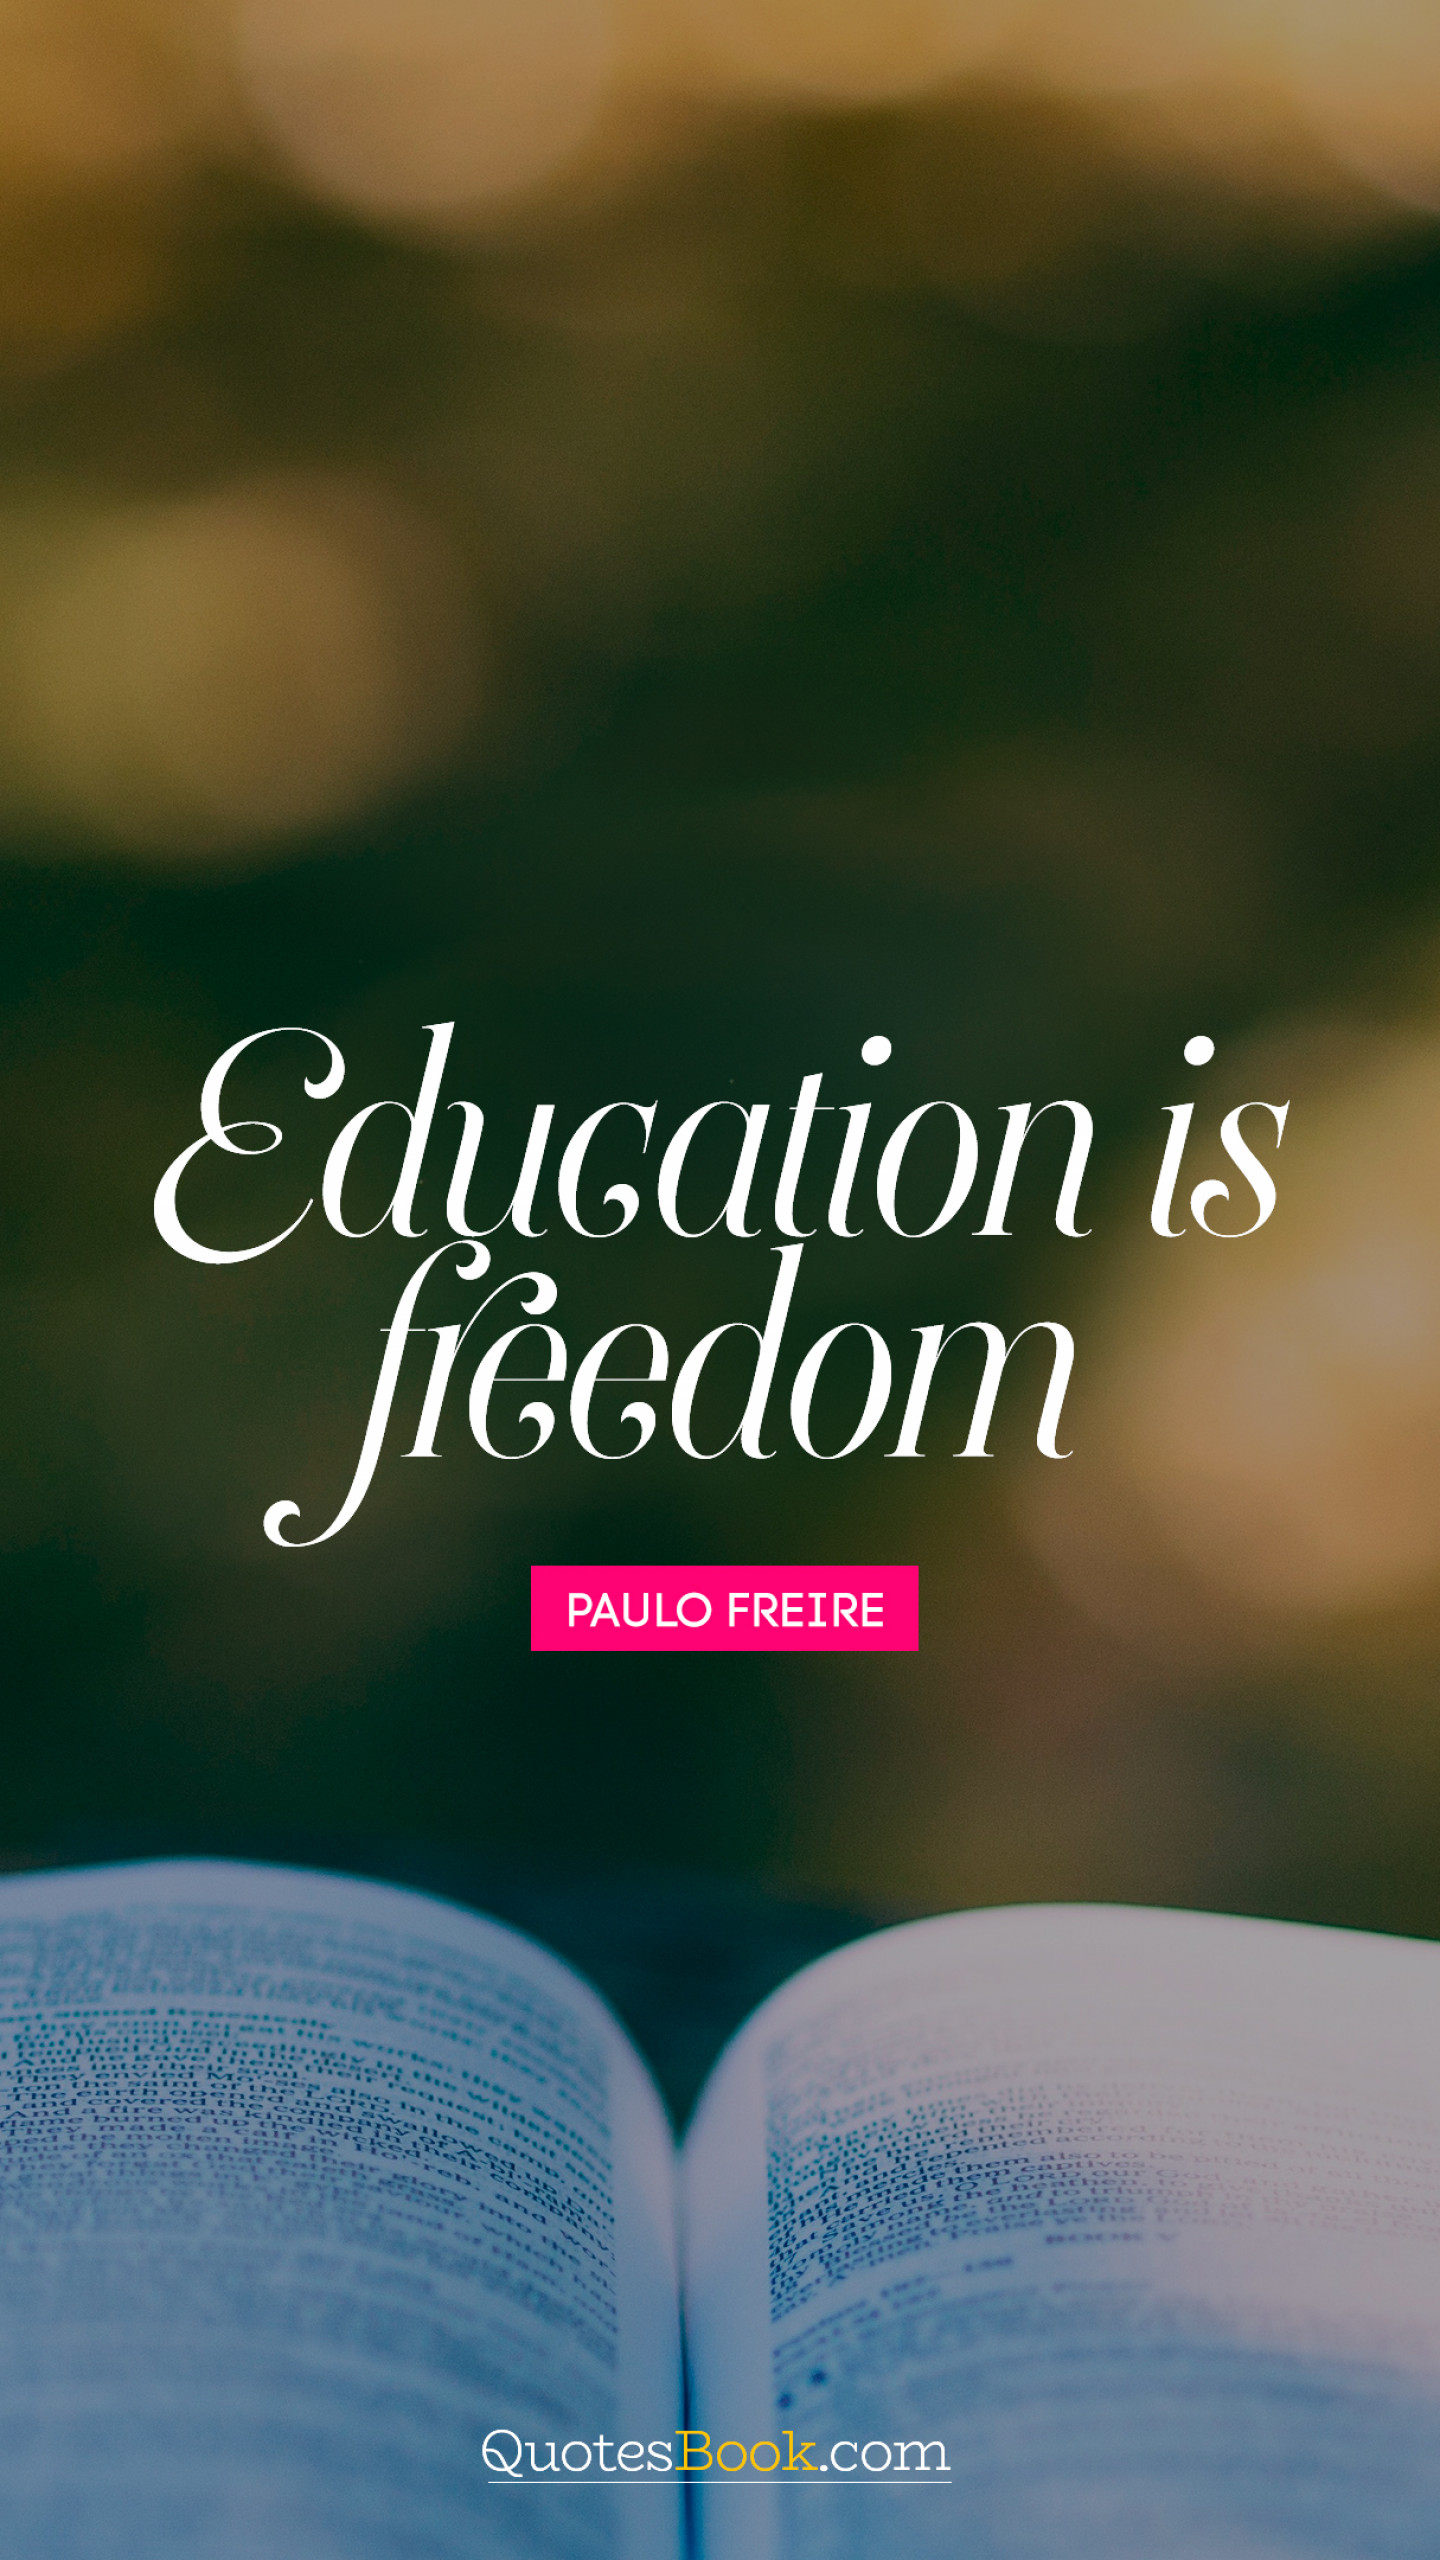 Education is freedom. - Quote by Paulo Freire - QuotesBook